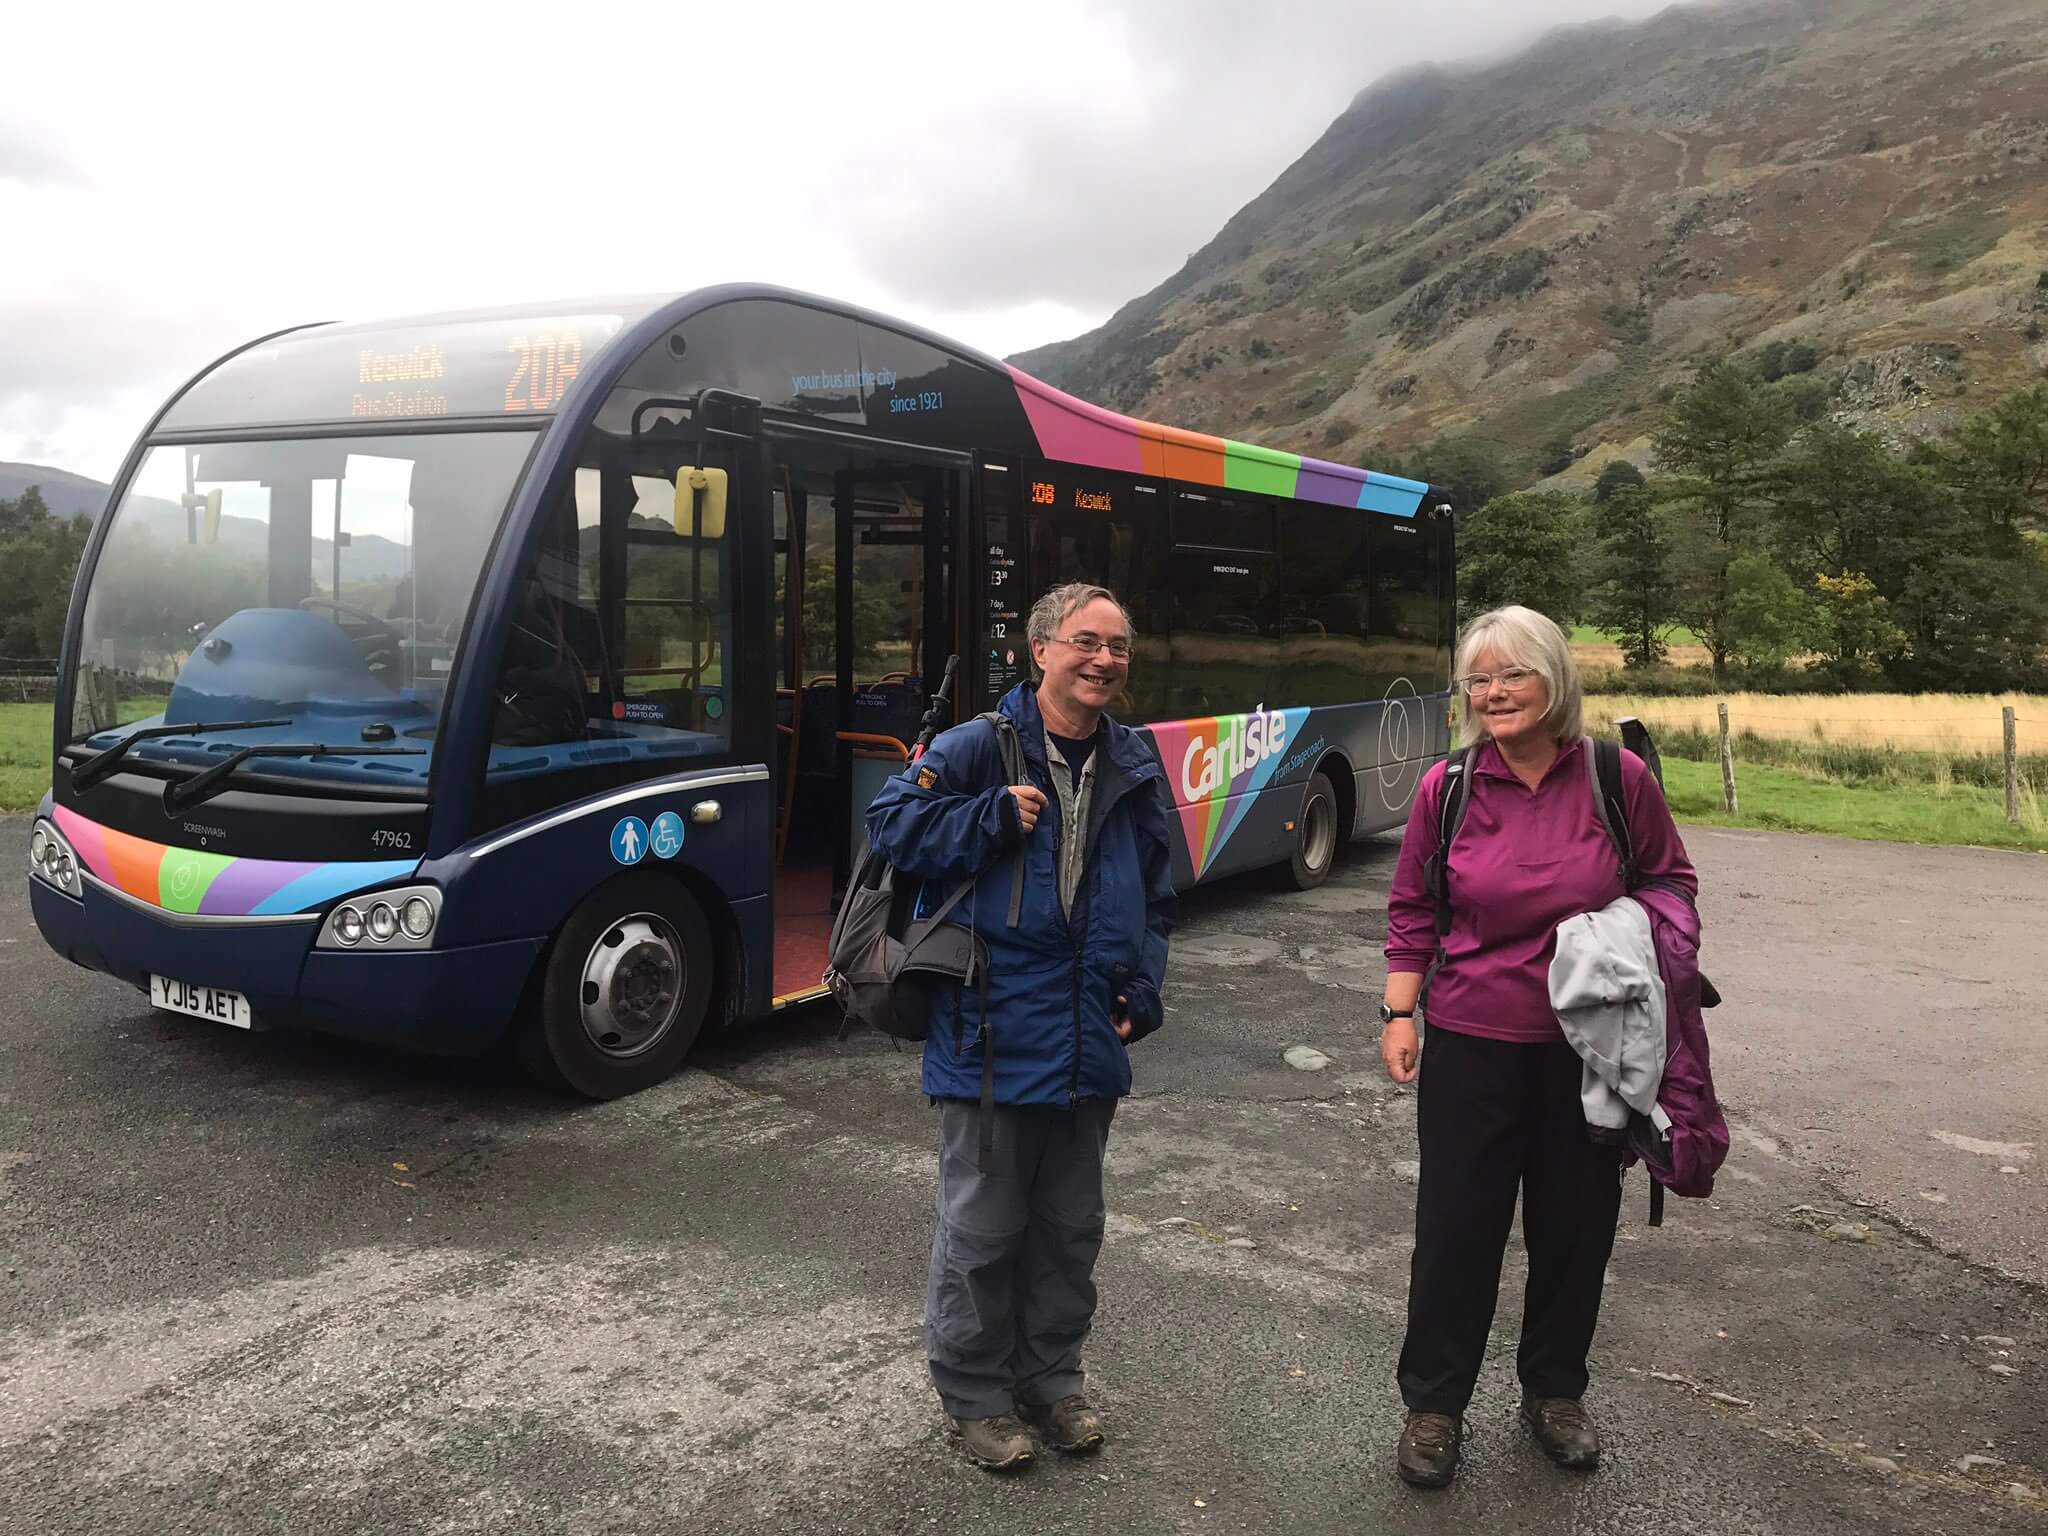 Stagecoach 208 in Patterdale